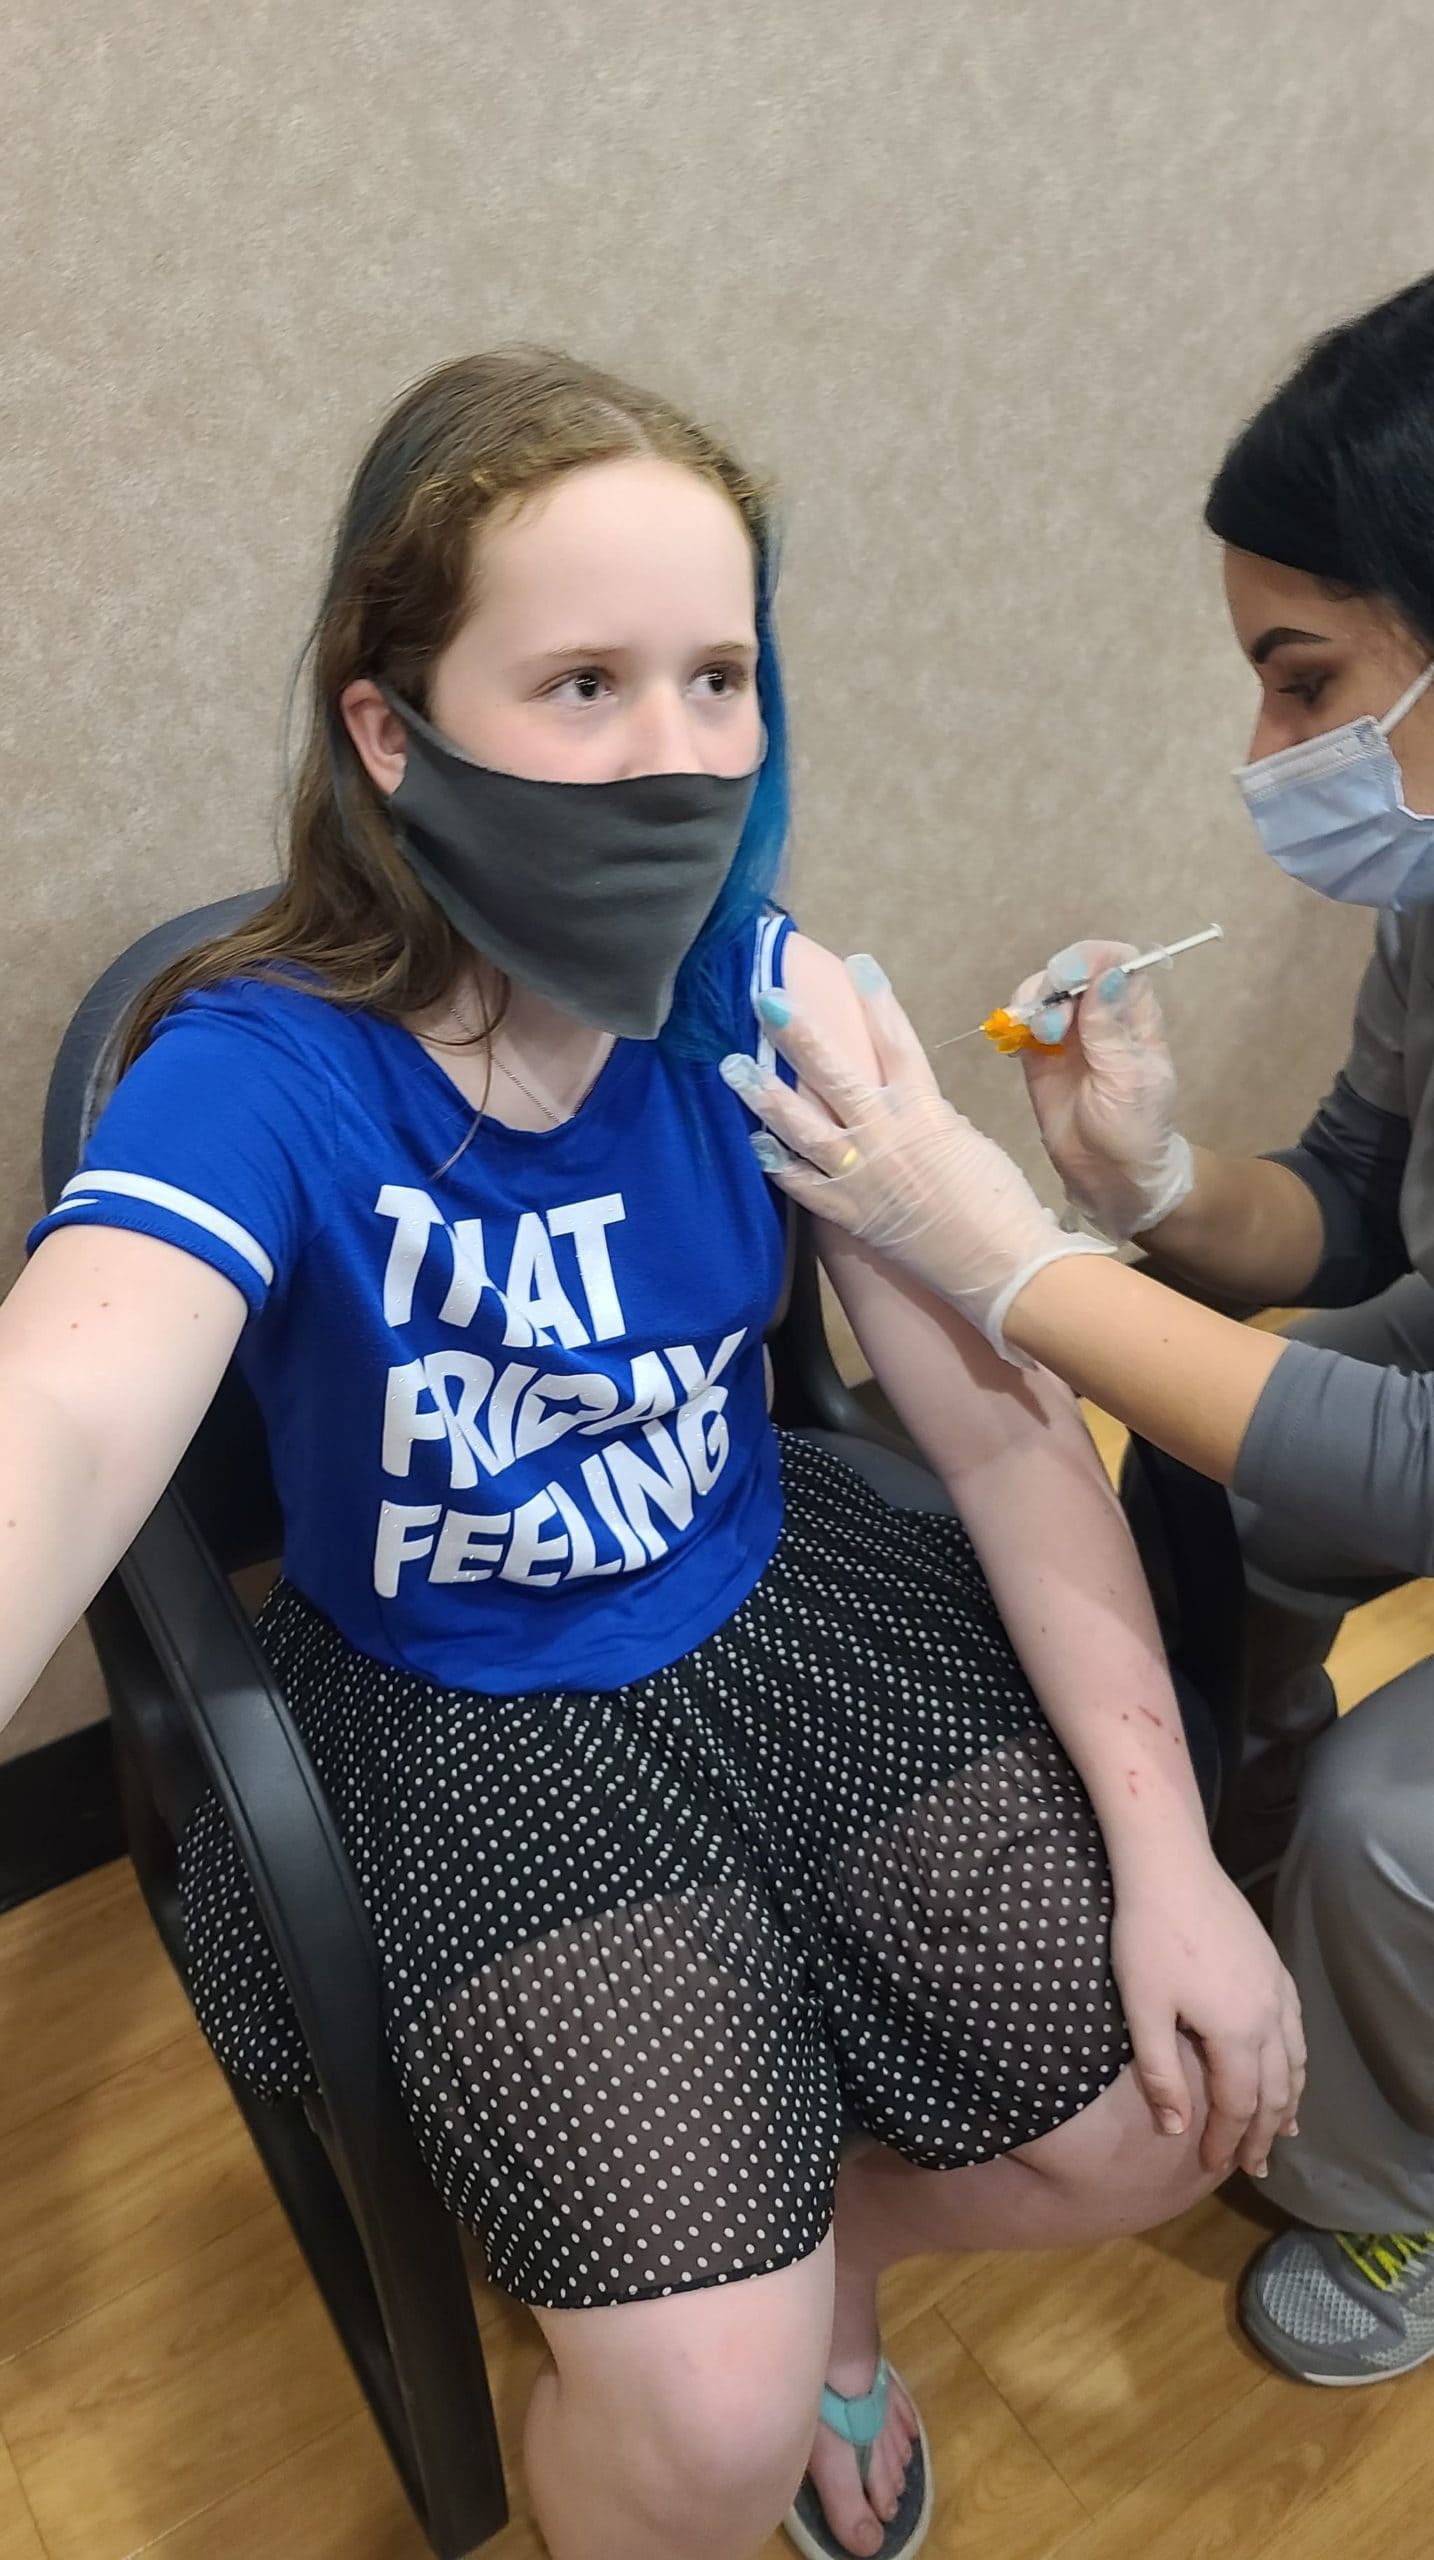 UPDATE: Newly vaccine-eligible teens/pre-teens flock to local COVID vaccine sites